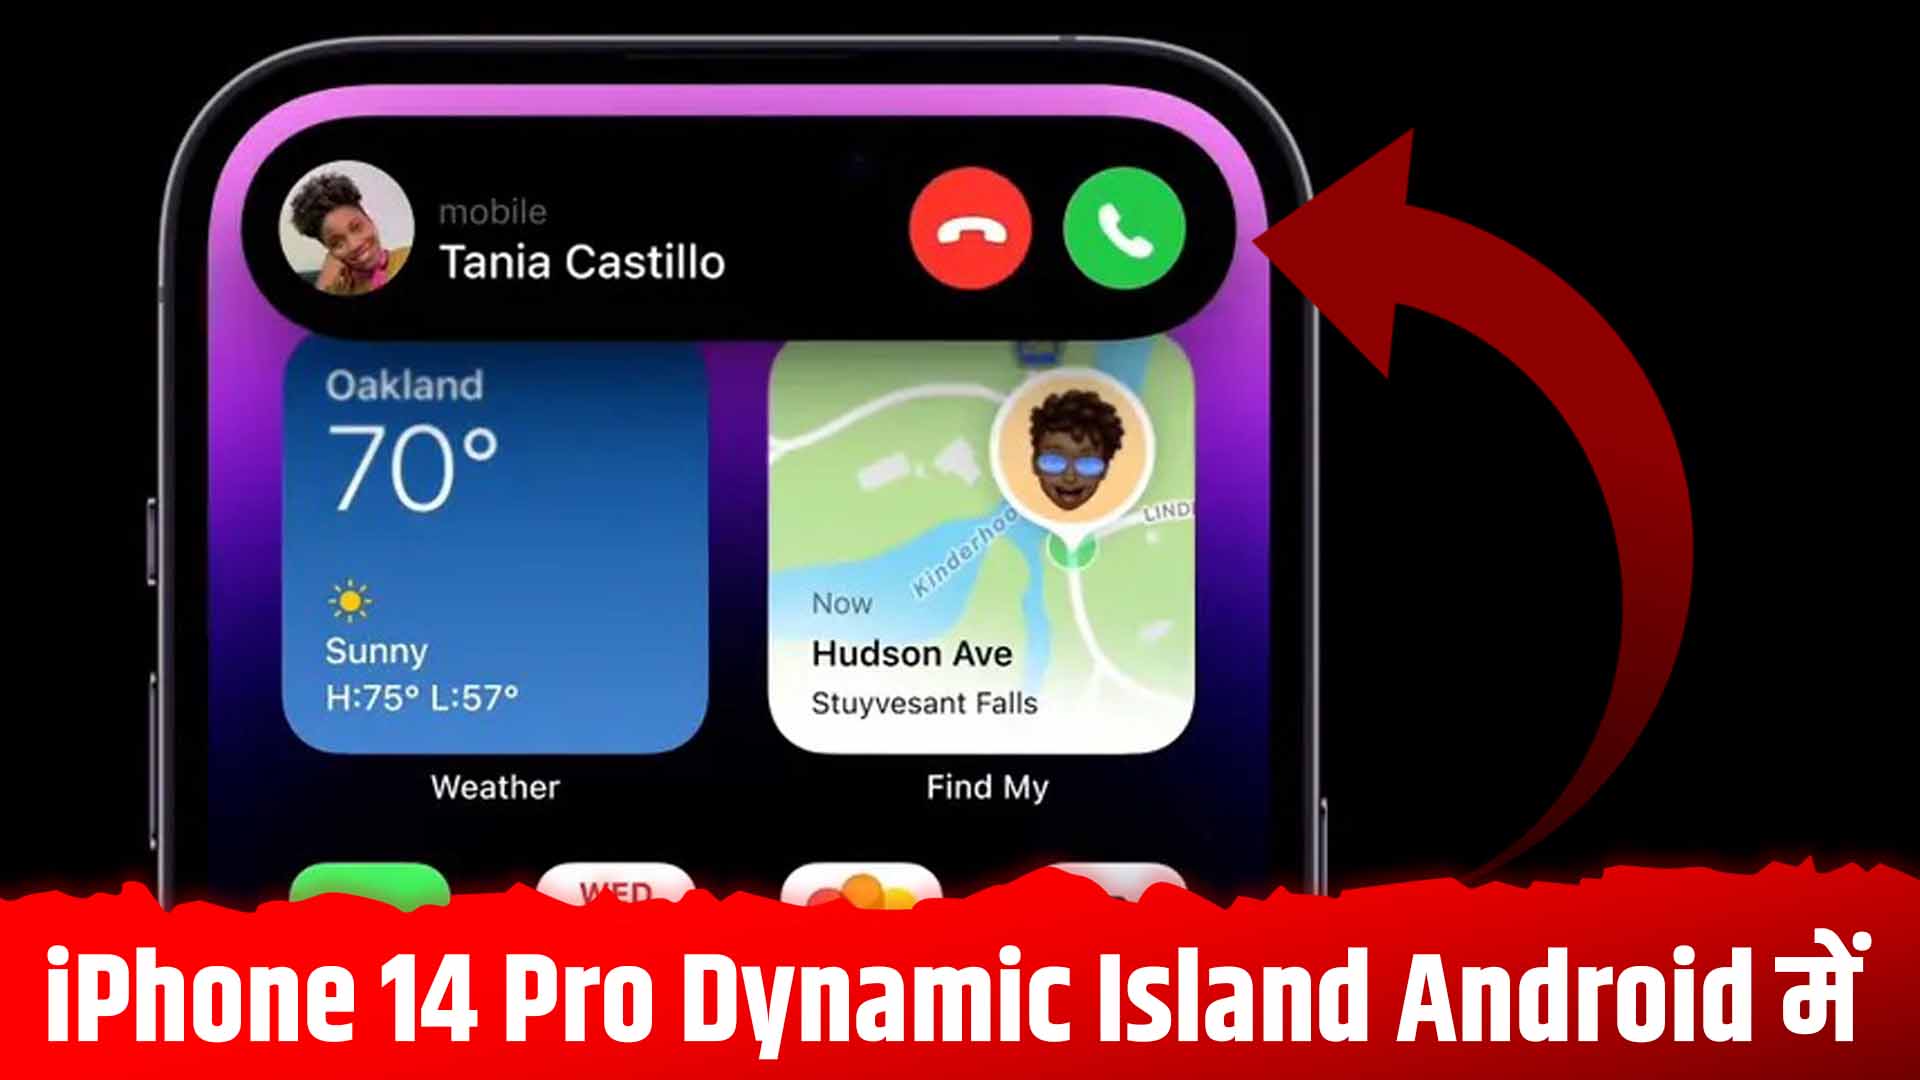 How to enable iPhone 14 Pro Dynamic Island on Android Phones